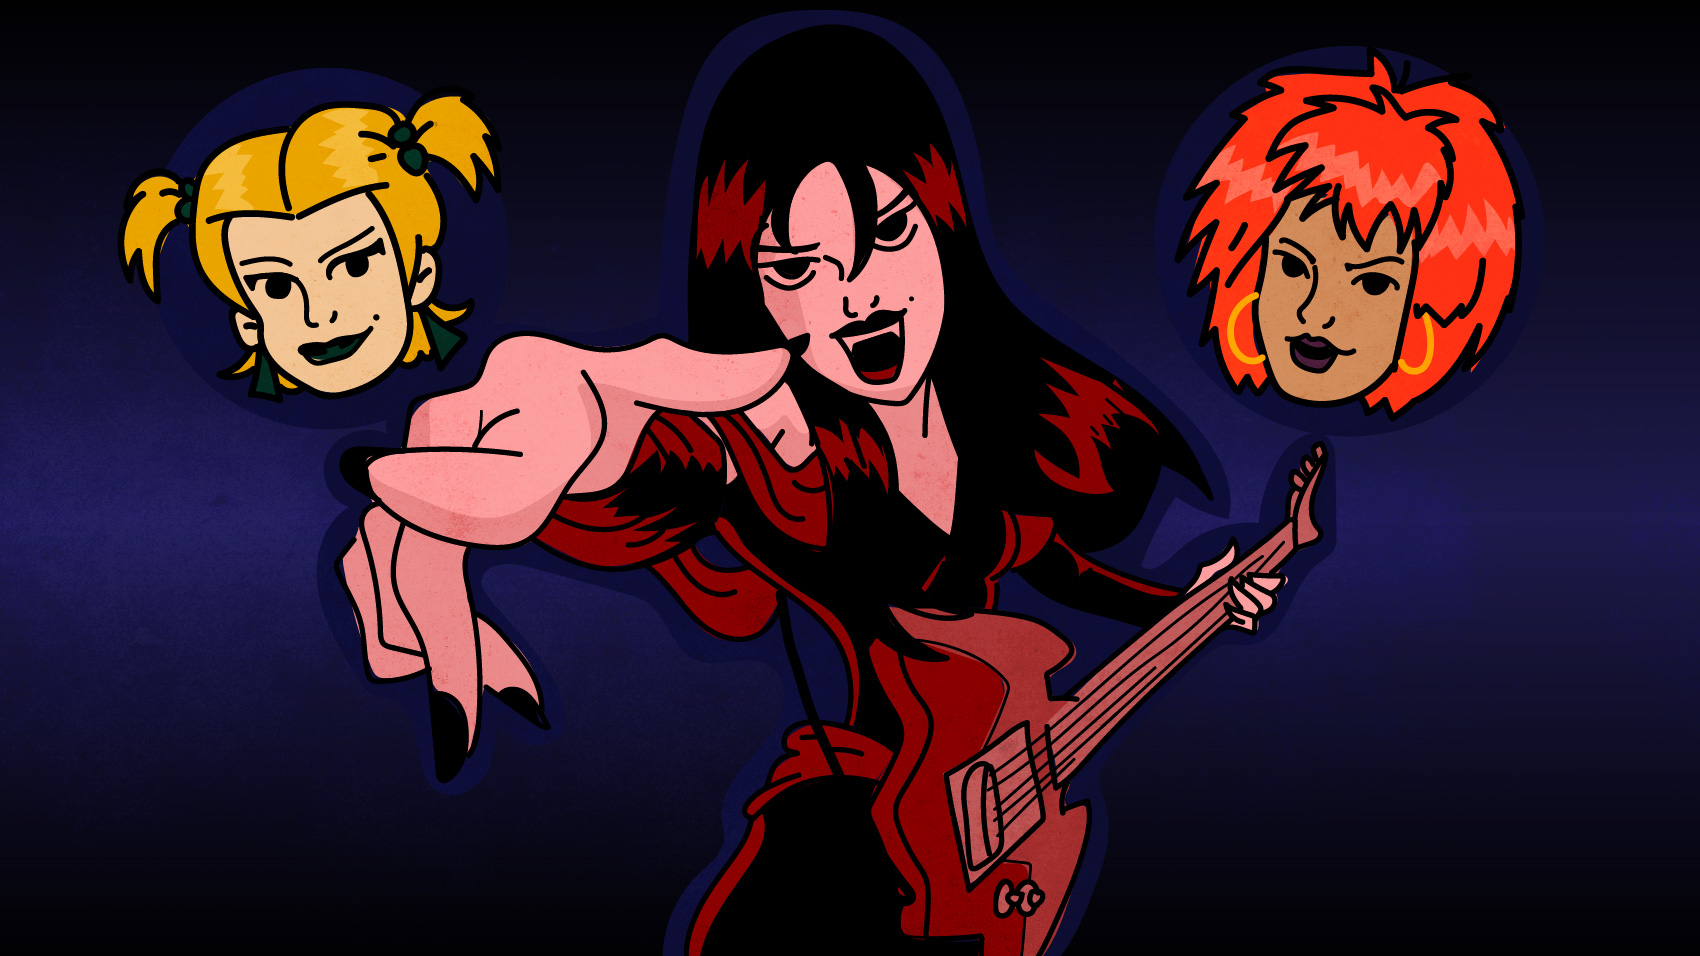 The Hex Girls From 'Scooby-Doo' Put a Spell on Me | Riot Fest